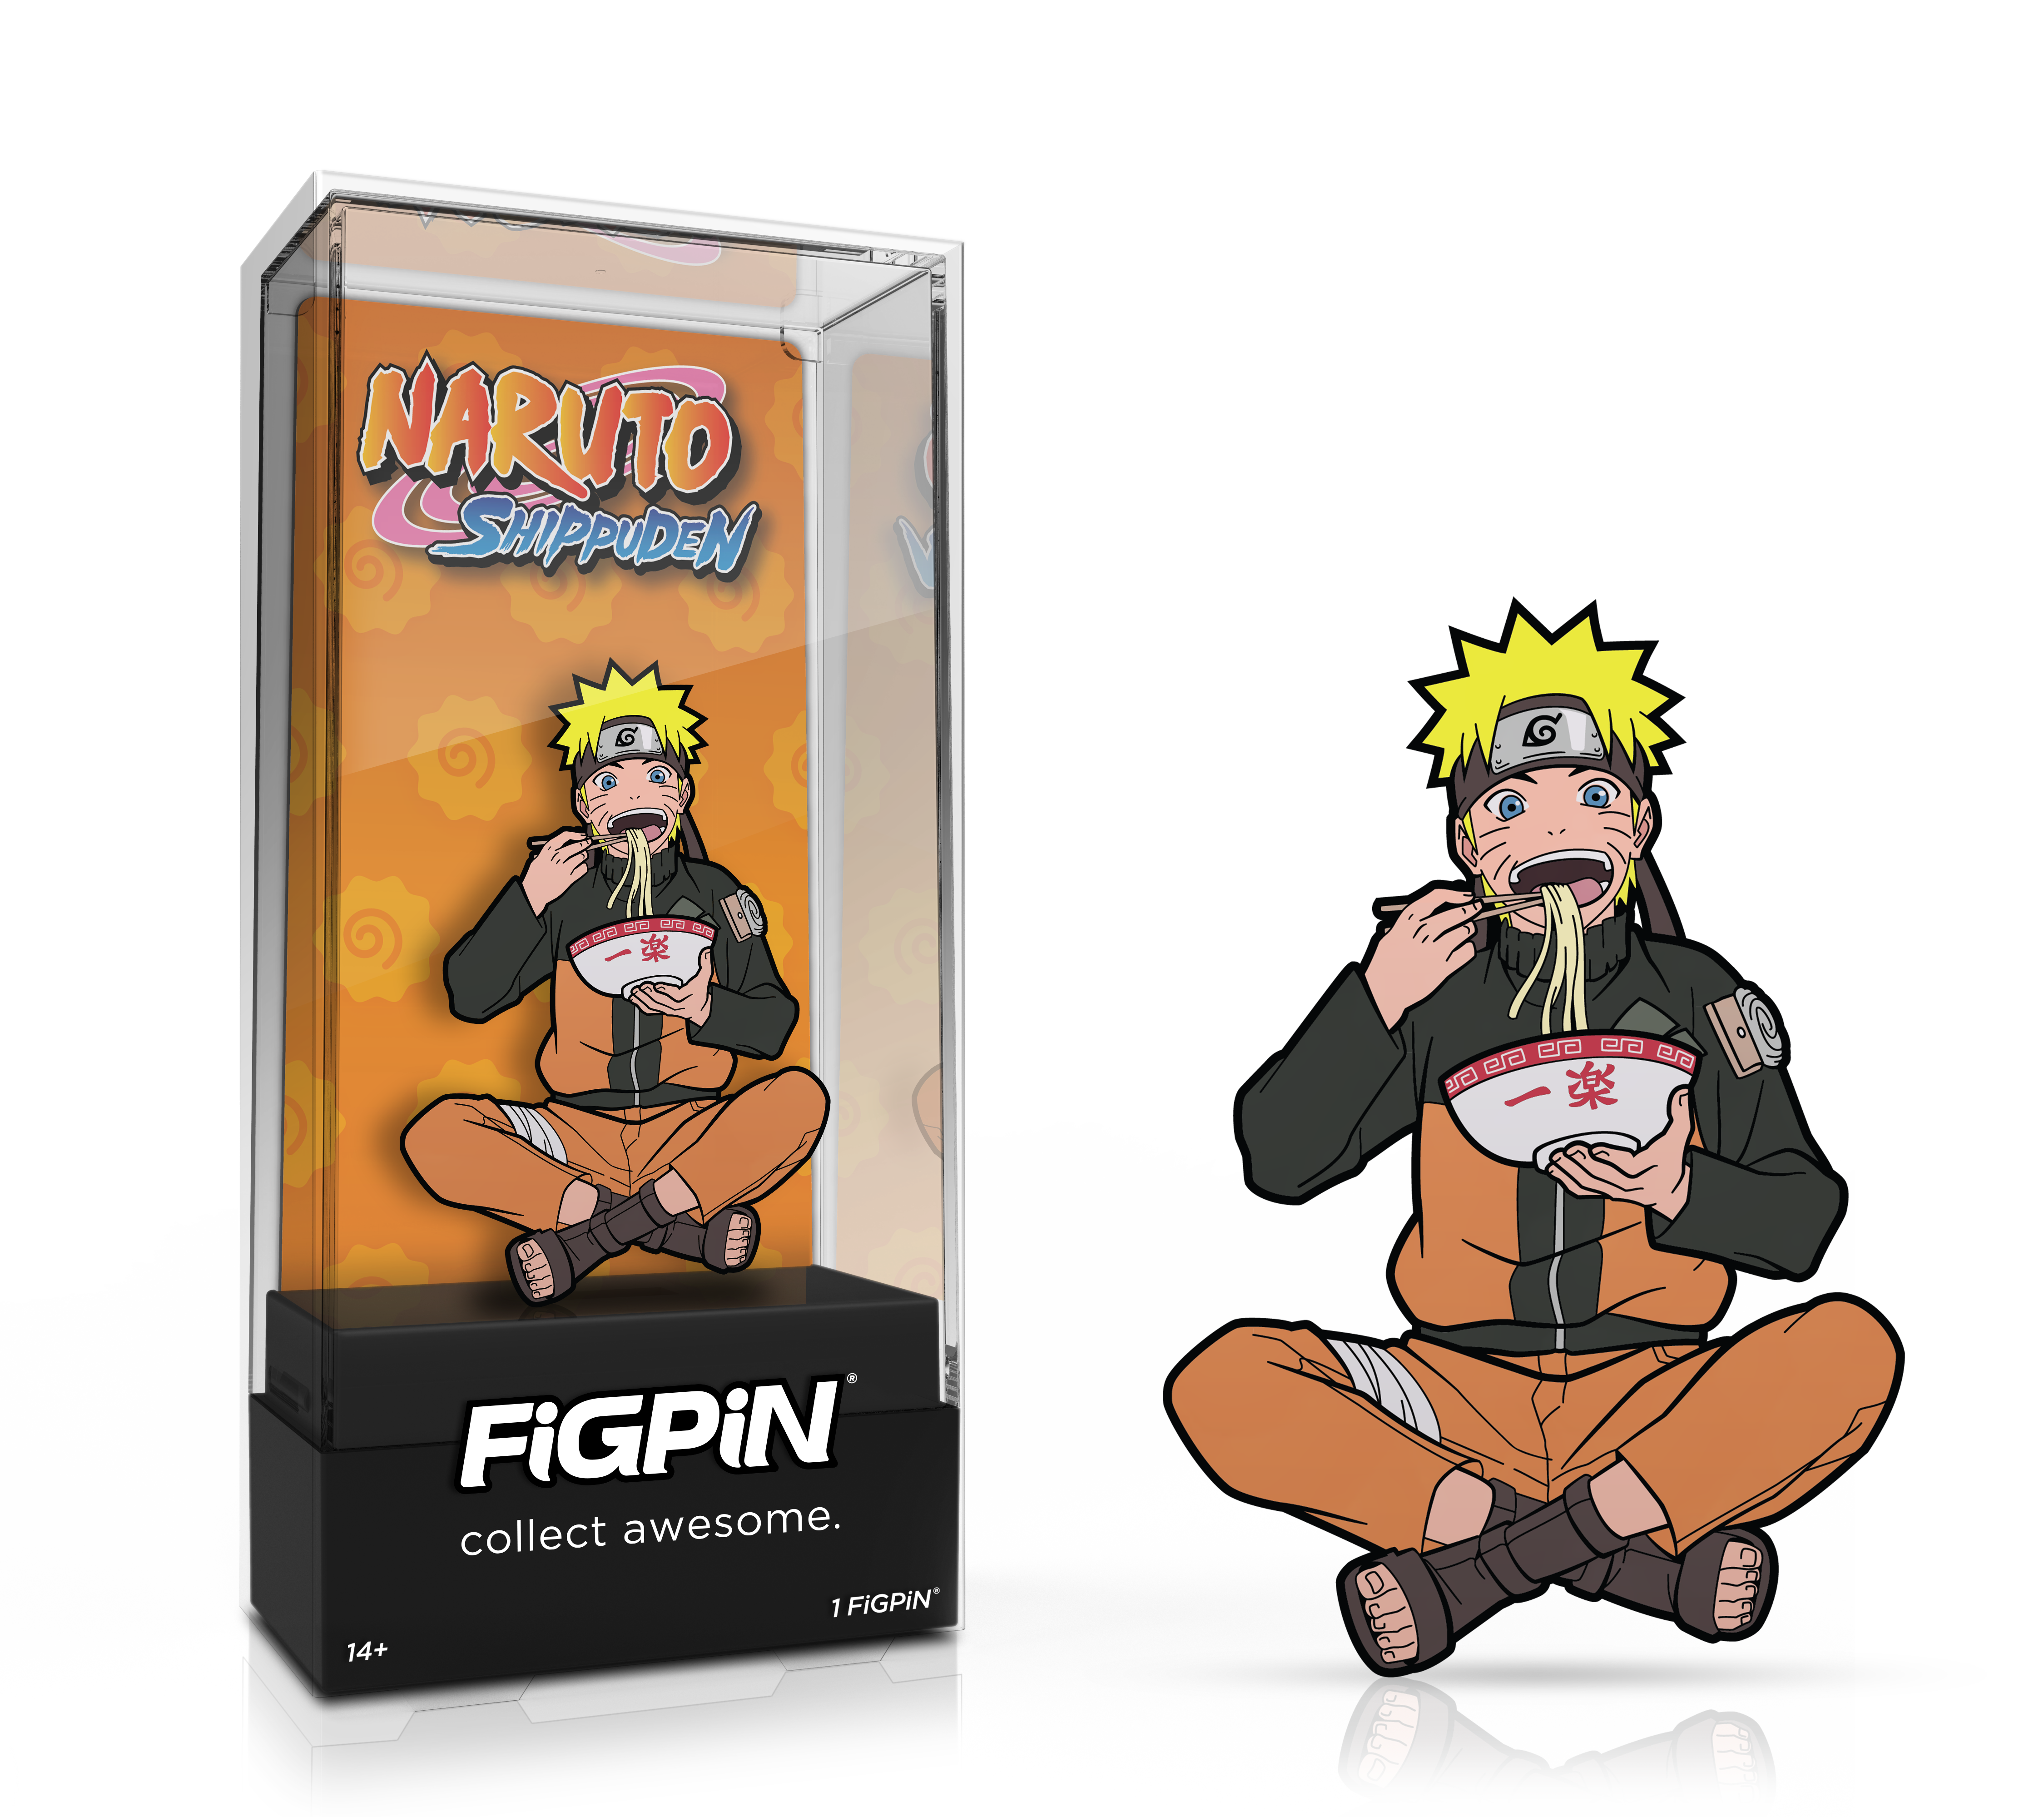 Side by side view of the Naruto Uzumaki (common) enamel pin in display case and the art render.